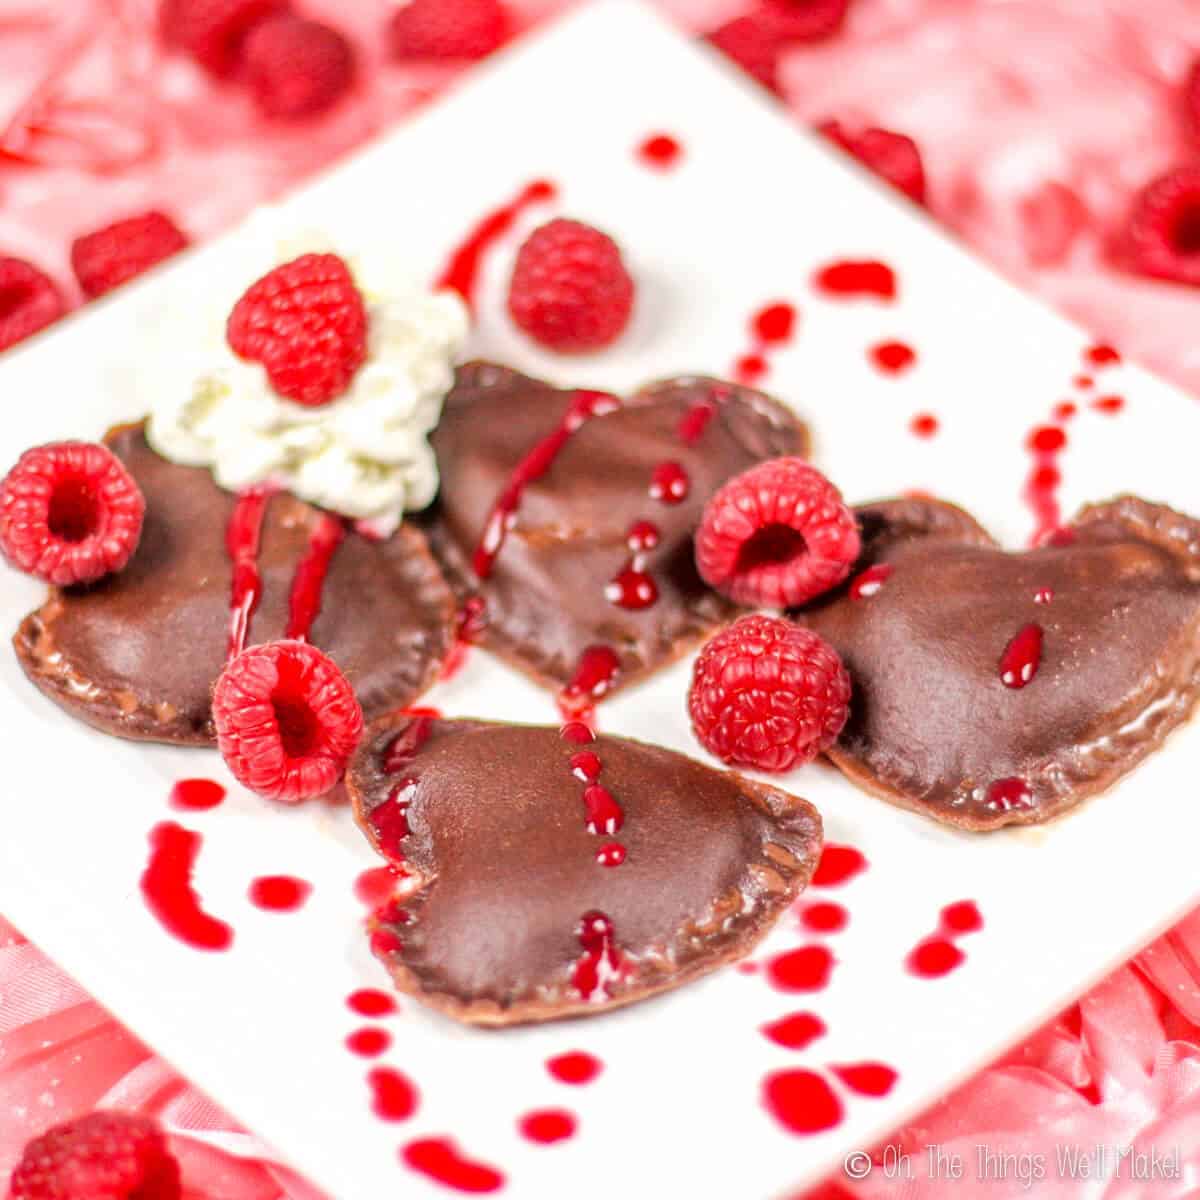 Four pieces of homemade chocolate heart shaped ravioli on a plate with raspberry puree, fresh raspberries and whipped cream